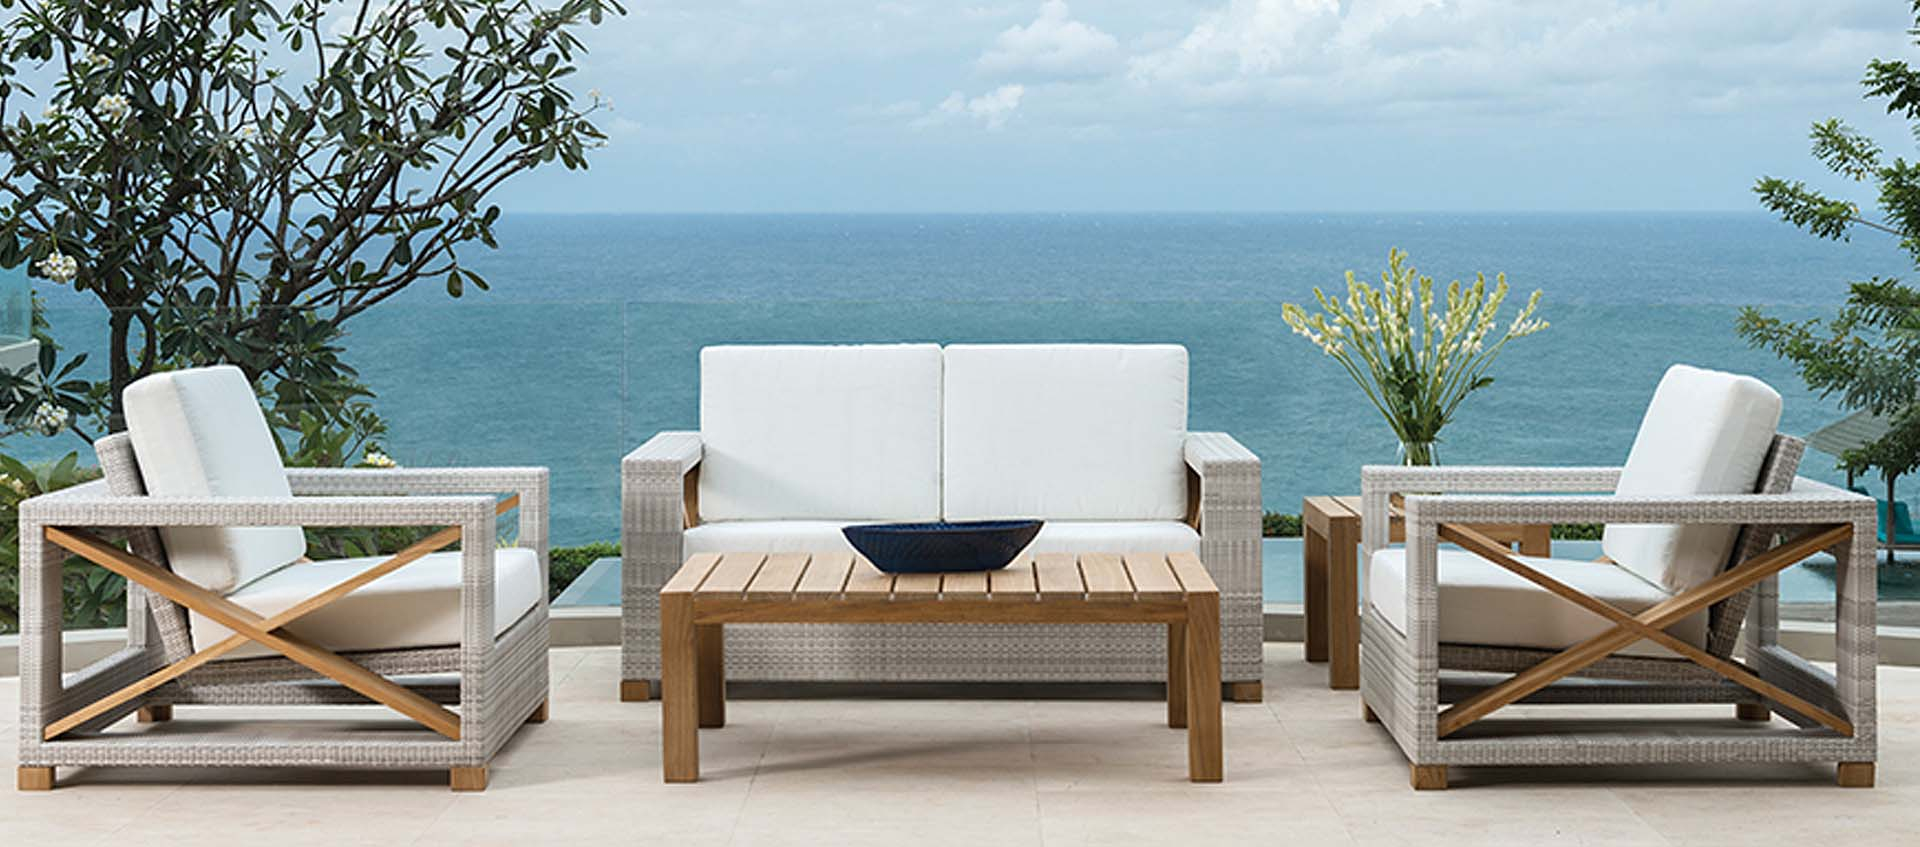 All American Outdoor Living Patio Furniture intended for measurements 1920 X 847